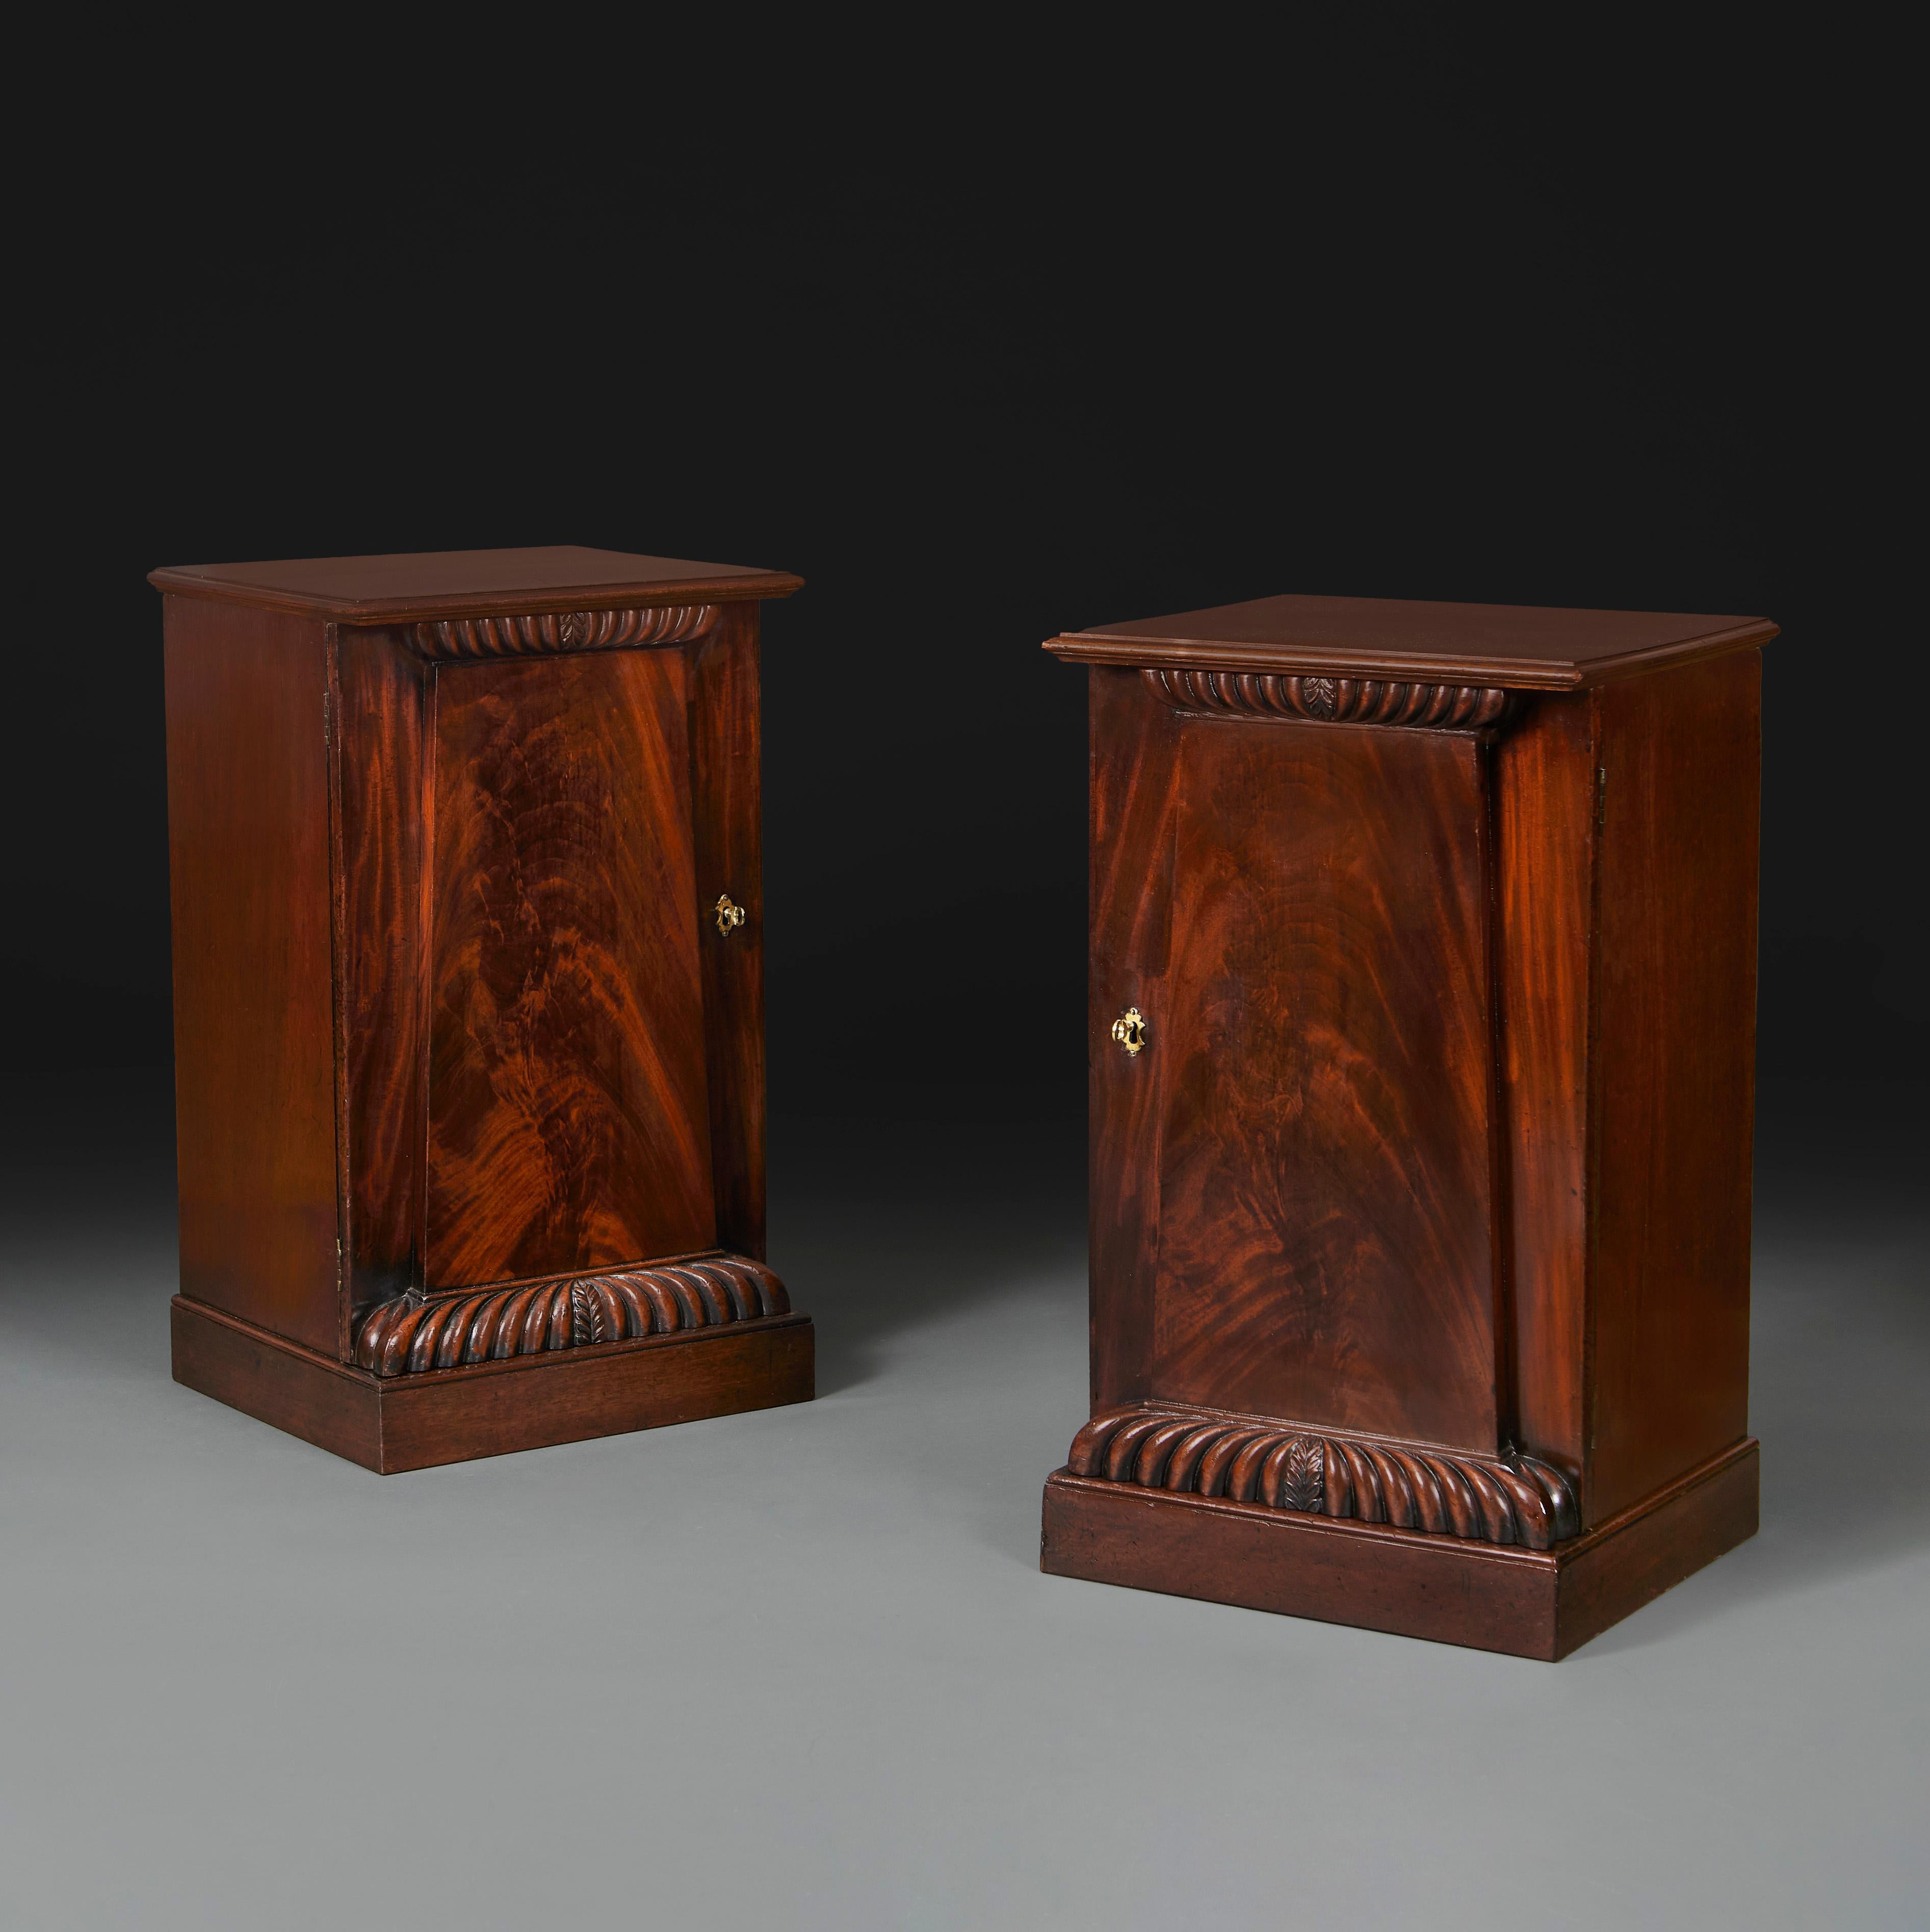 England, circa 1880

A pair of late nineteenth century mahogany bedside cabinets of pedestal form, opening with one door to the fronts, with carved gadrooning to top and base. 

Height    77.00cm

Width     45.00cm

Depth     39.50cm